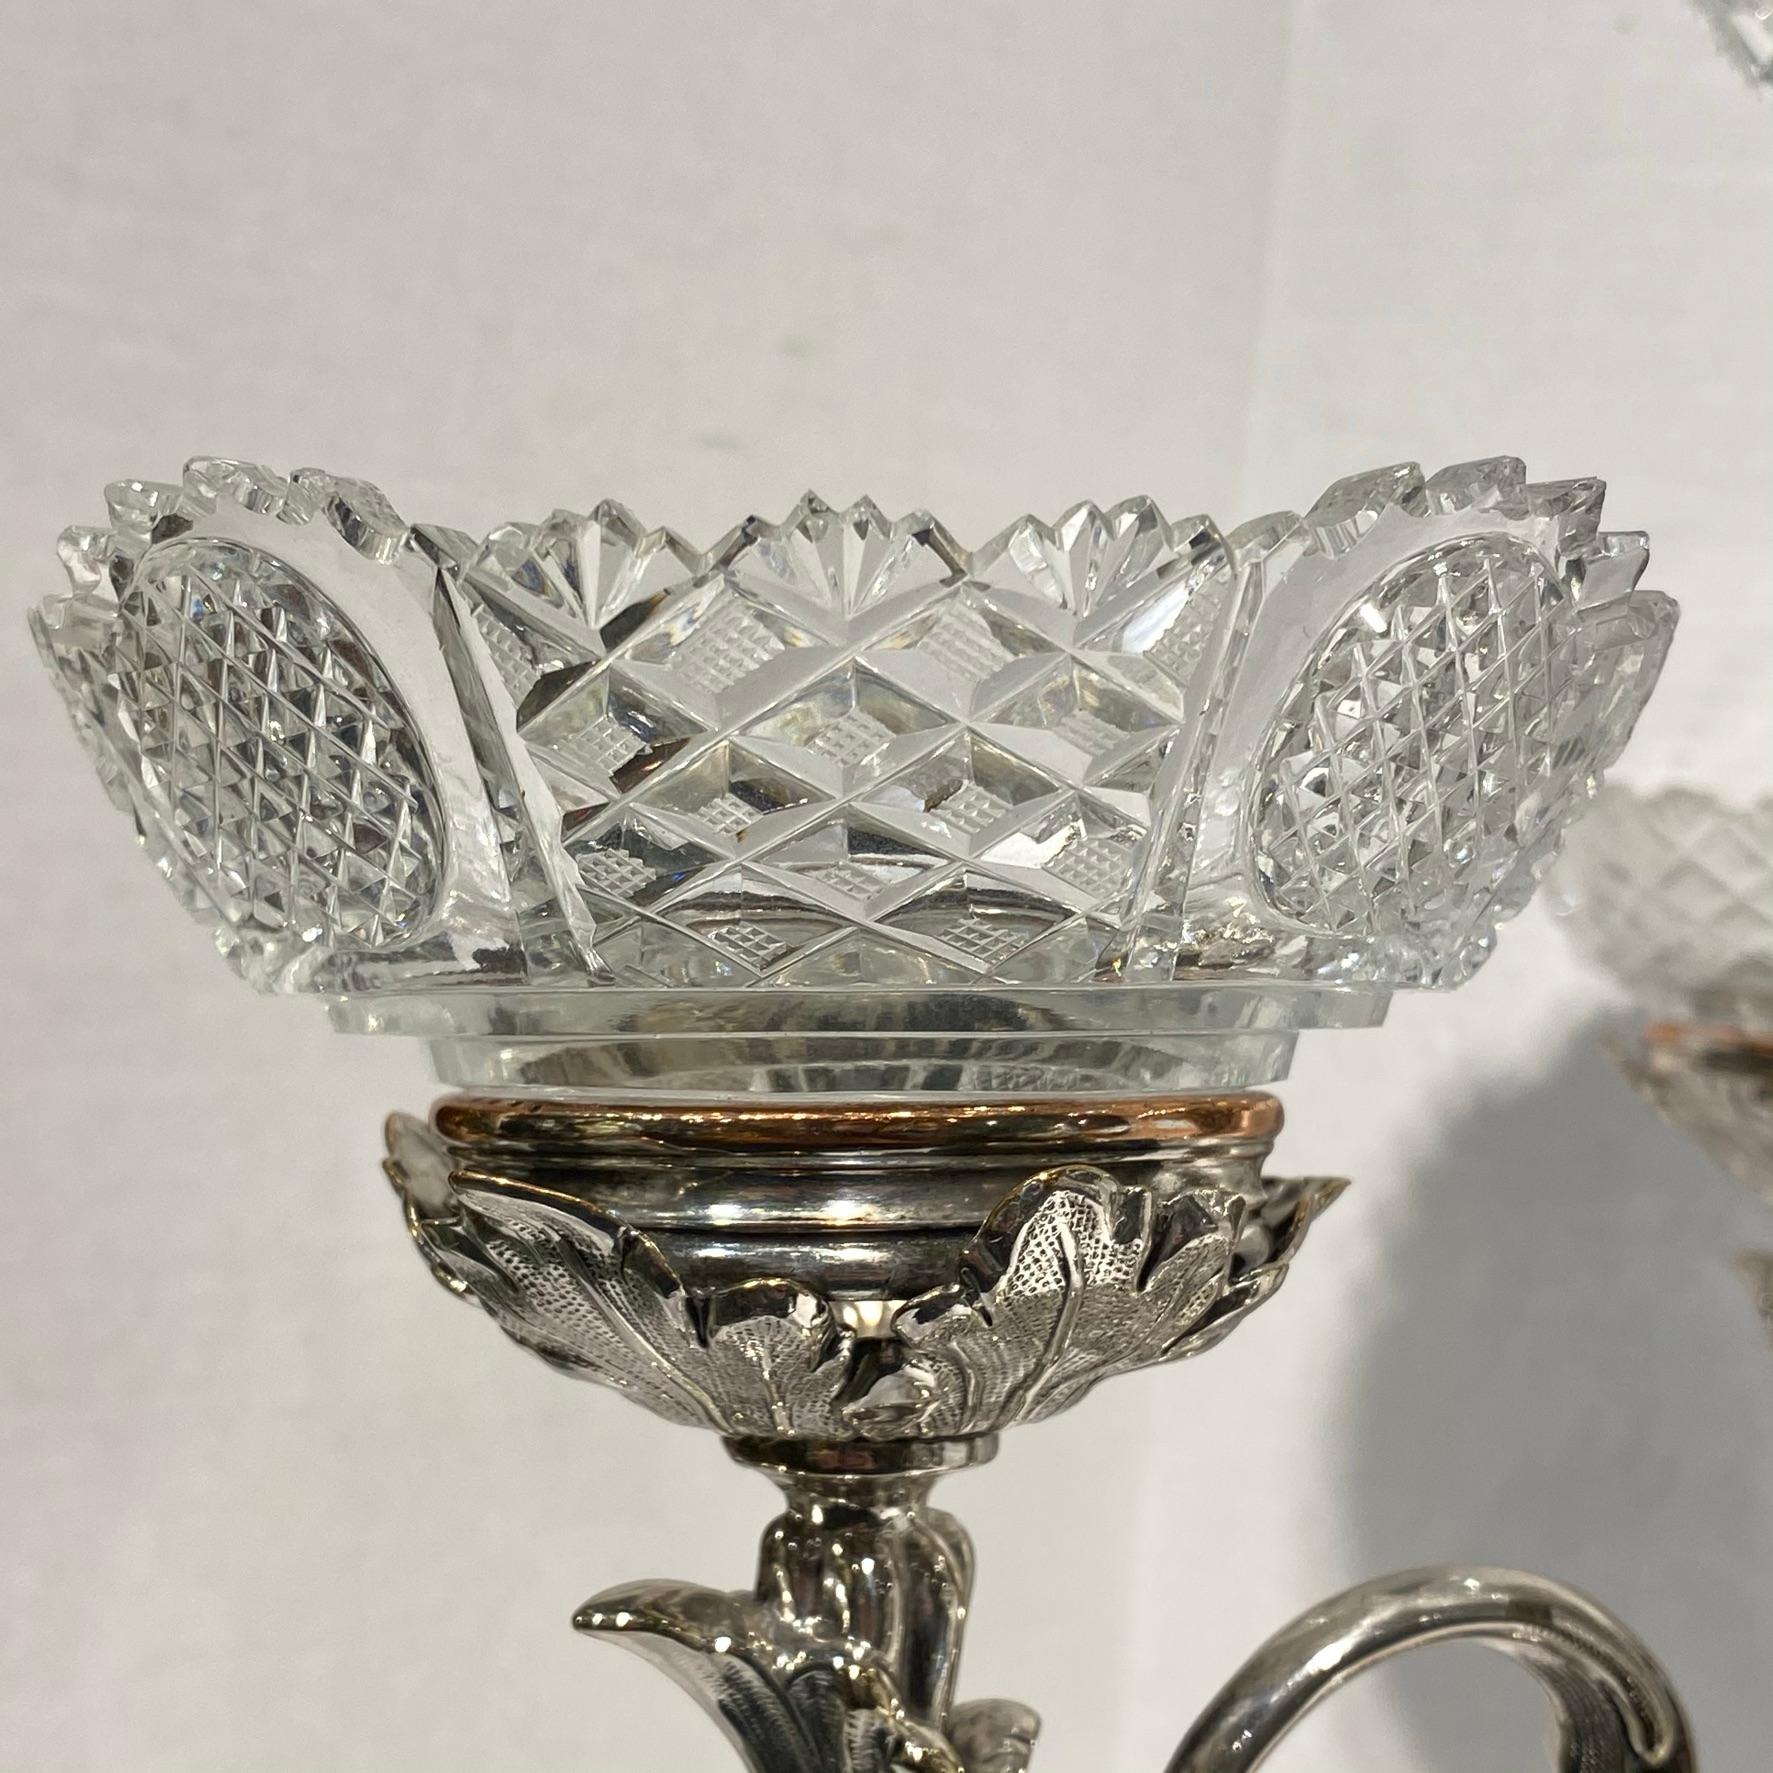 English 19th century silver plated and cut-glass Epergne with code of arm 